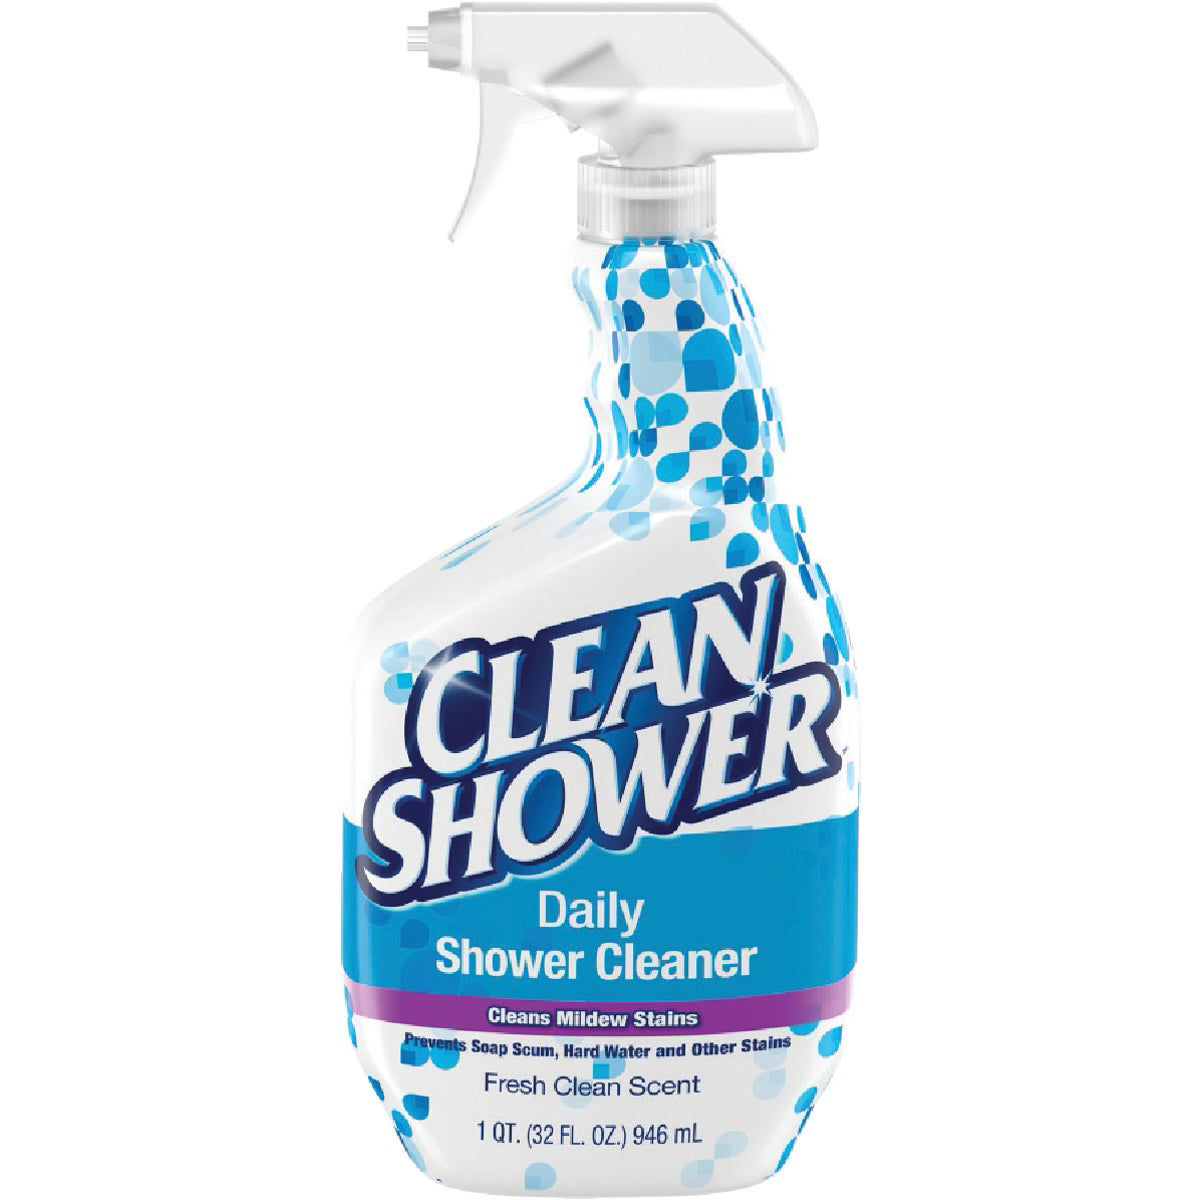  Clean Shower Daily Shower Cleaner, 32 Fluid Ounce